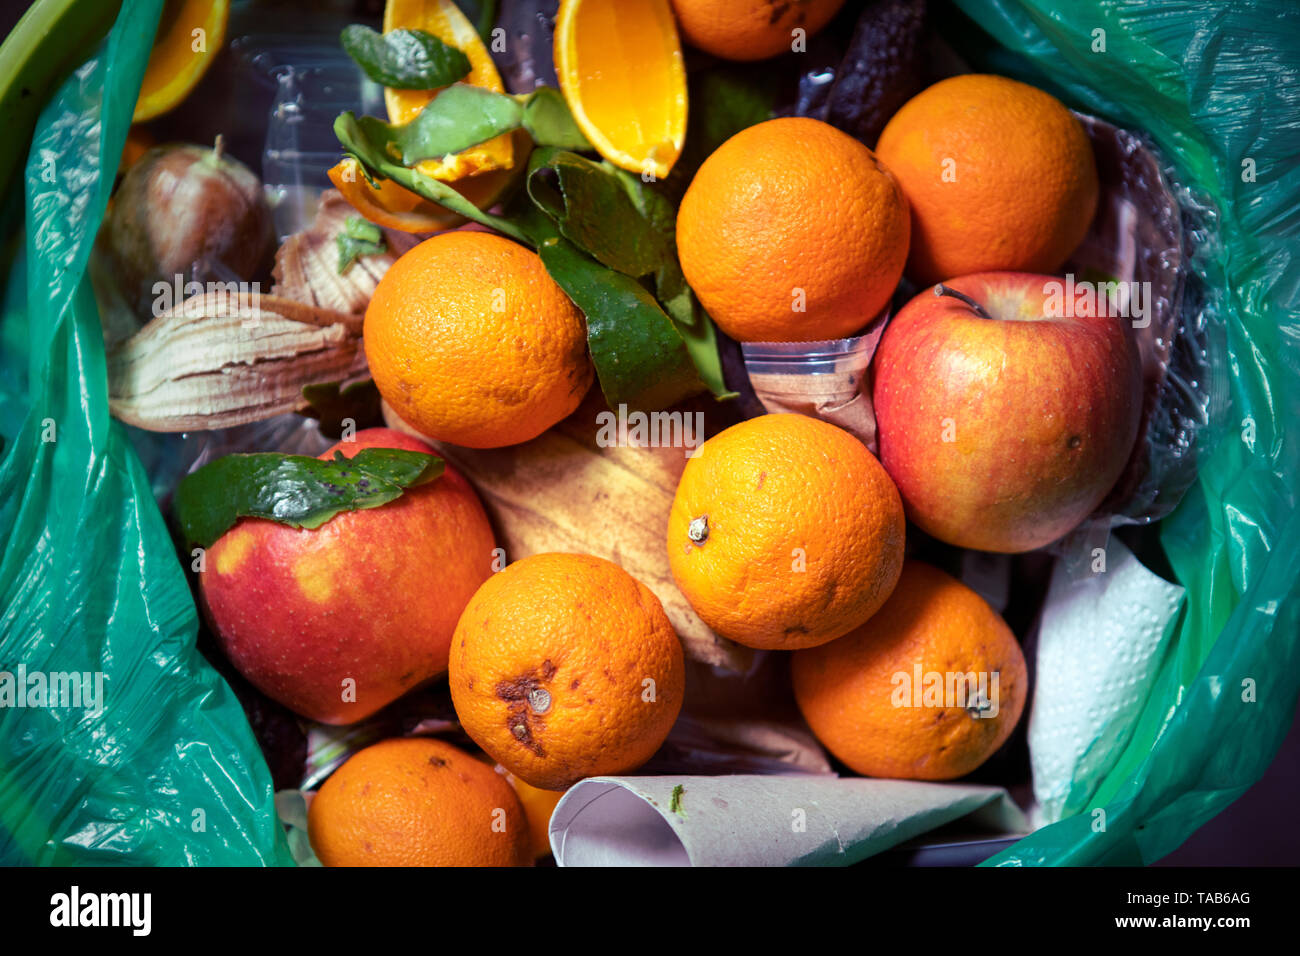 Food waste problem, leftovers Thrown into into the trash can. Spoiled food in refuse bin. Ecological issues. Concept of food waste reduction. Stock Photo